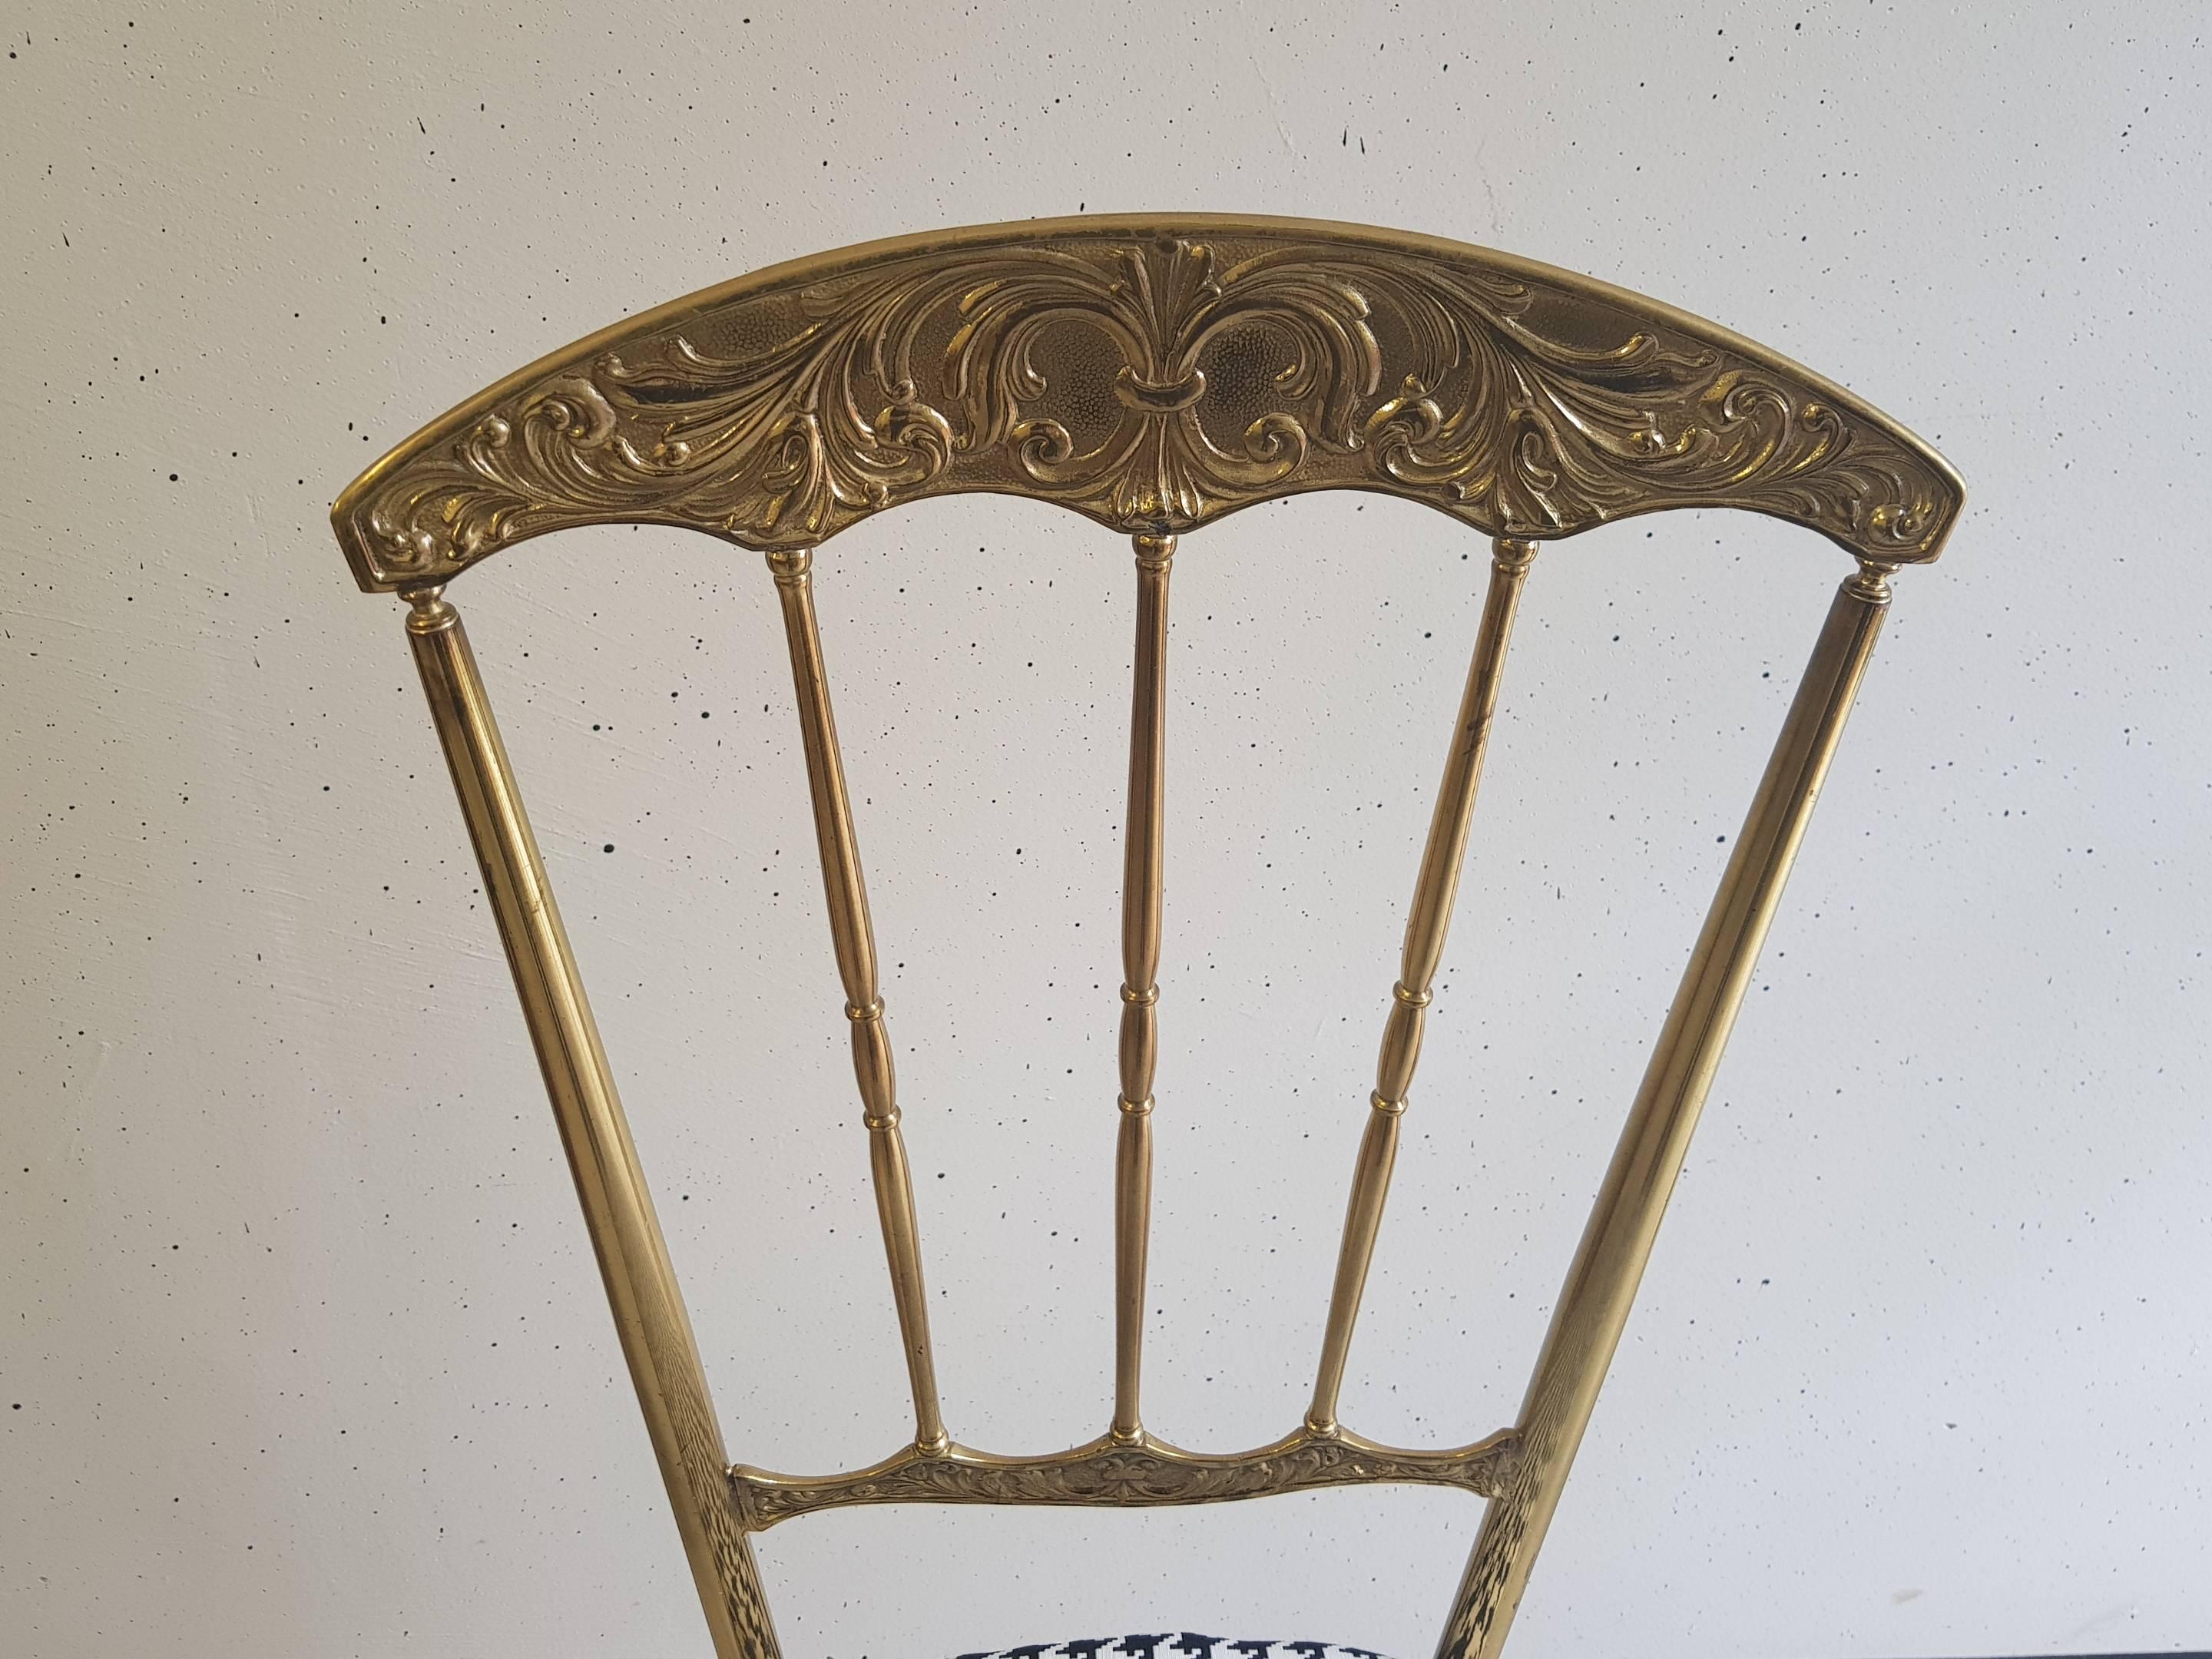 For sale two beautiful Italian vintage brass chairs, as corner or livingroom seats, they are stable, and with new upholstery, and this pair will cost you only 1899 with free shipping worldwide!